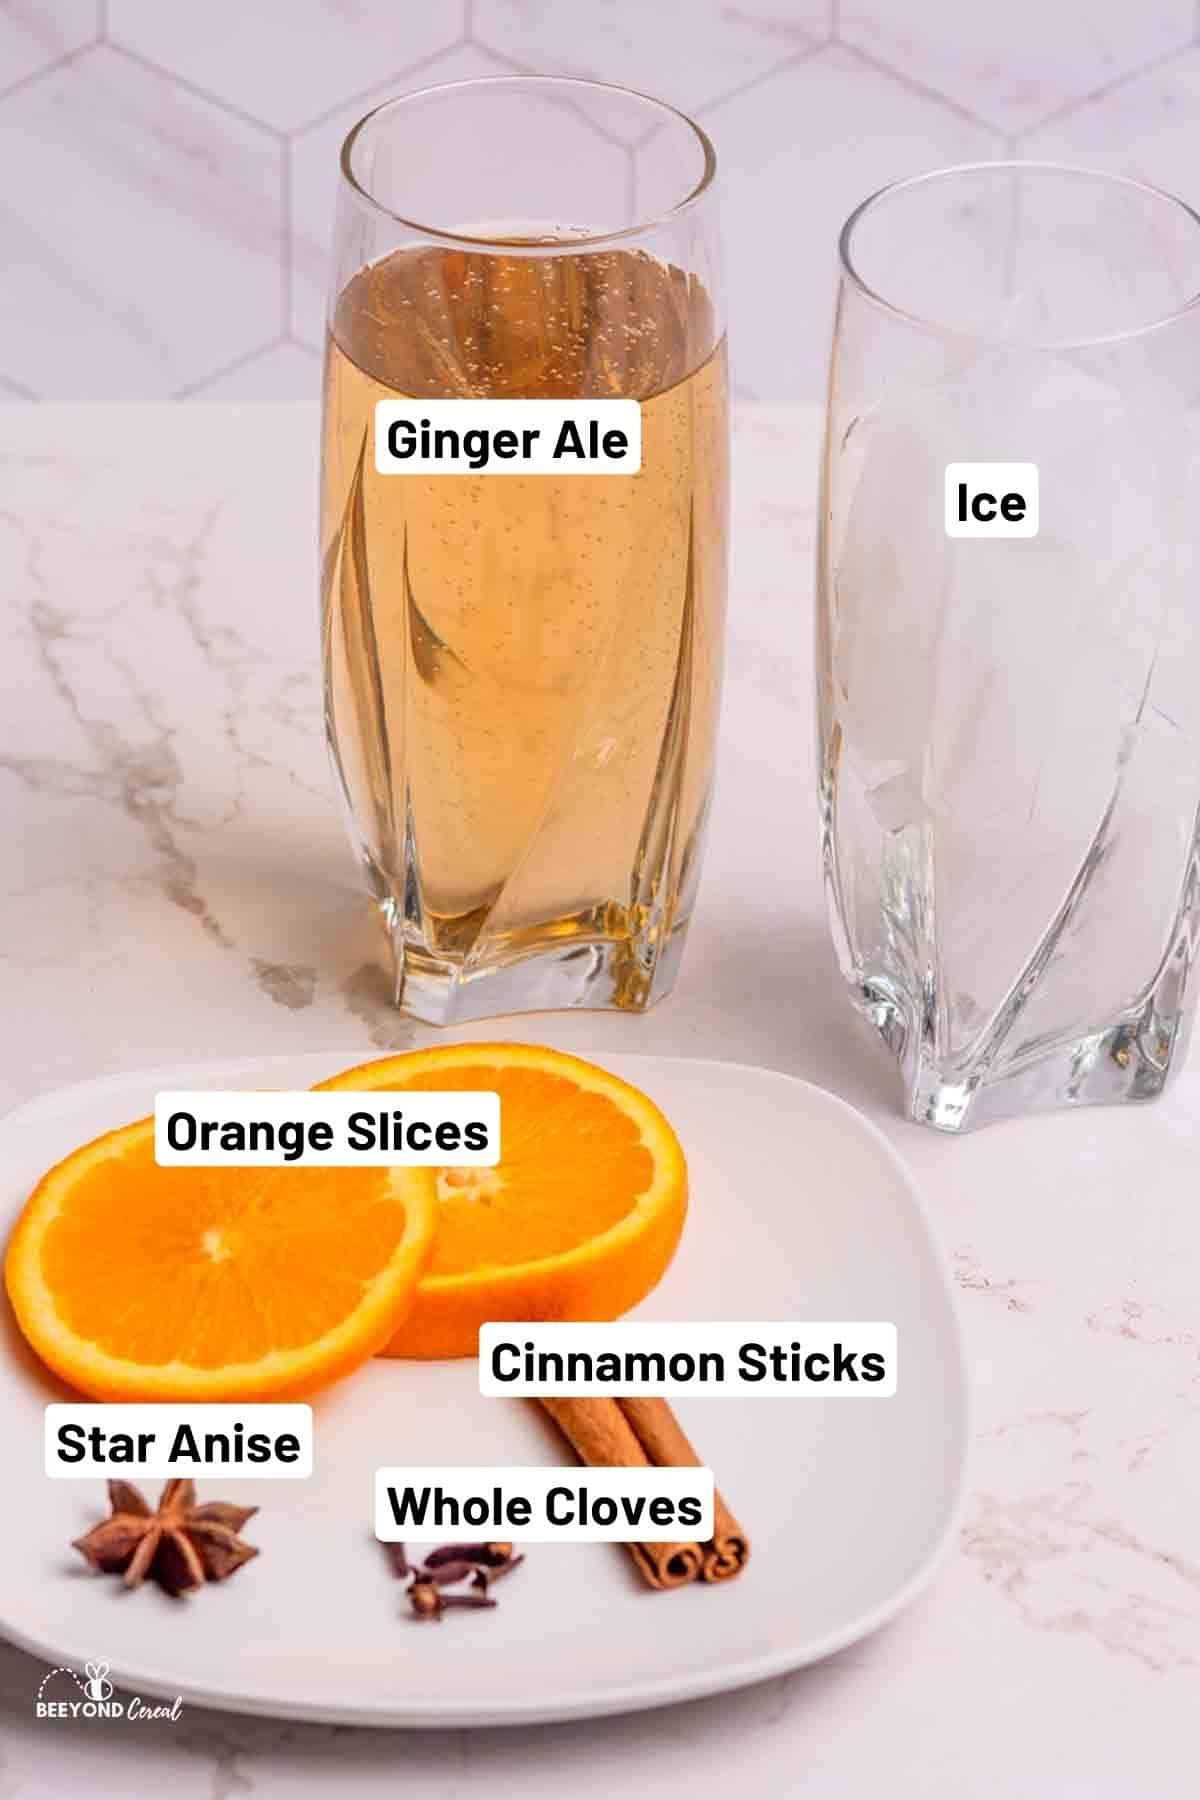 a glass of ice next to a glass of ginger ale and orange slices and spices on a plate